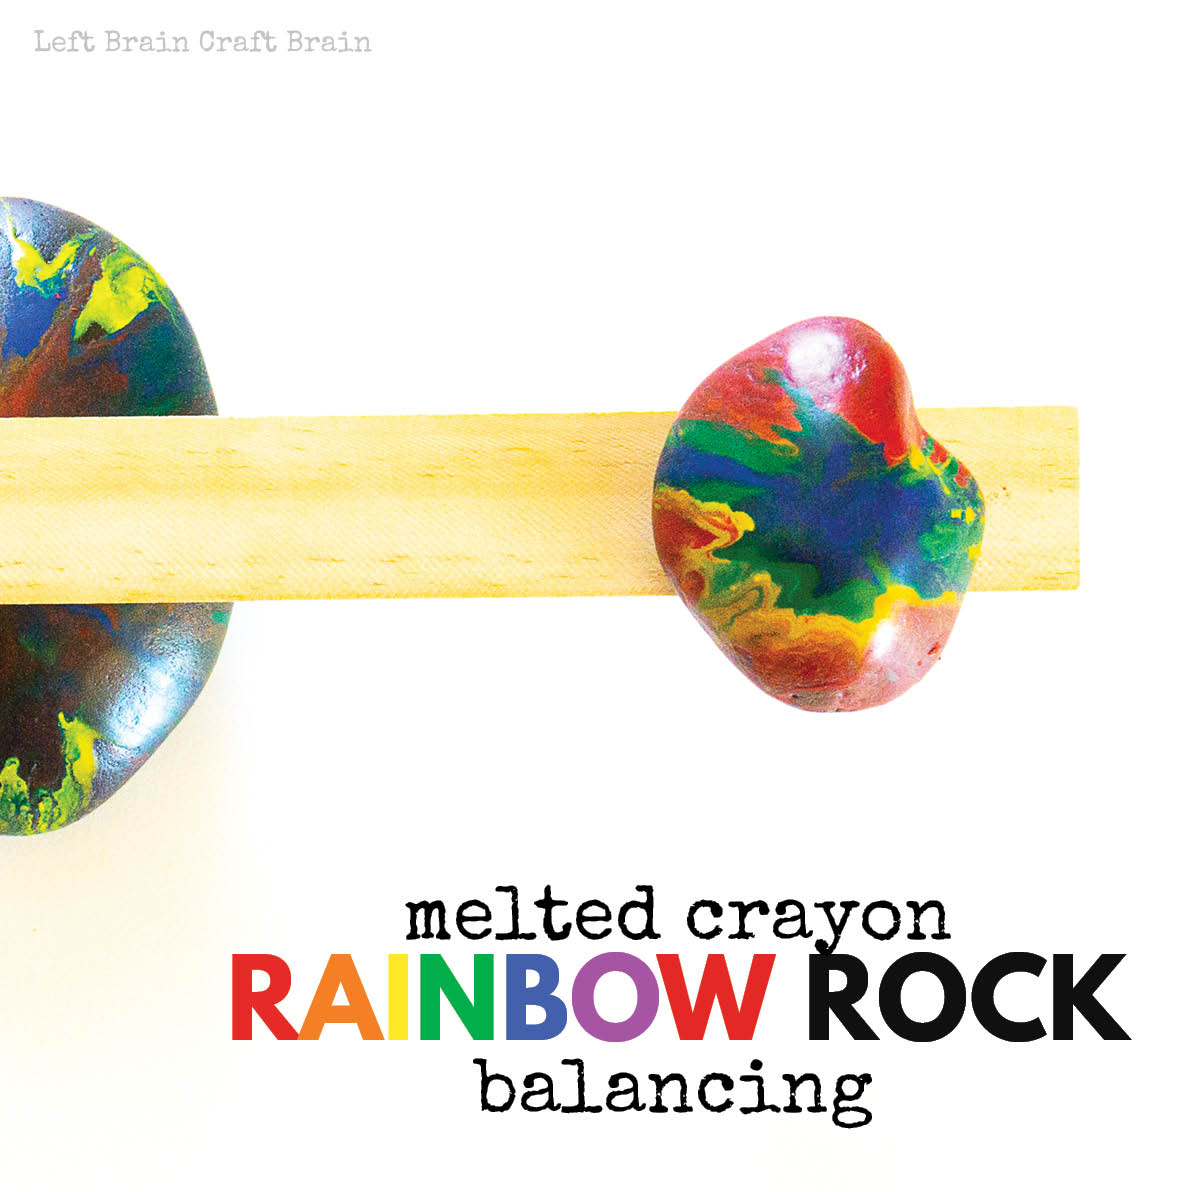 Melted crayon rainbow rock balancing is a zen engineering project filled with color and fun.